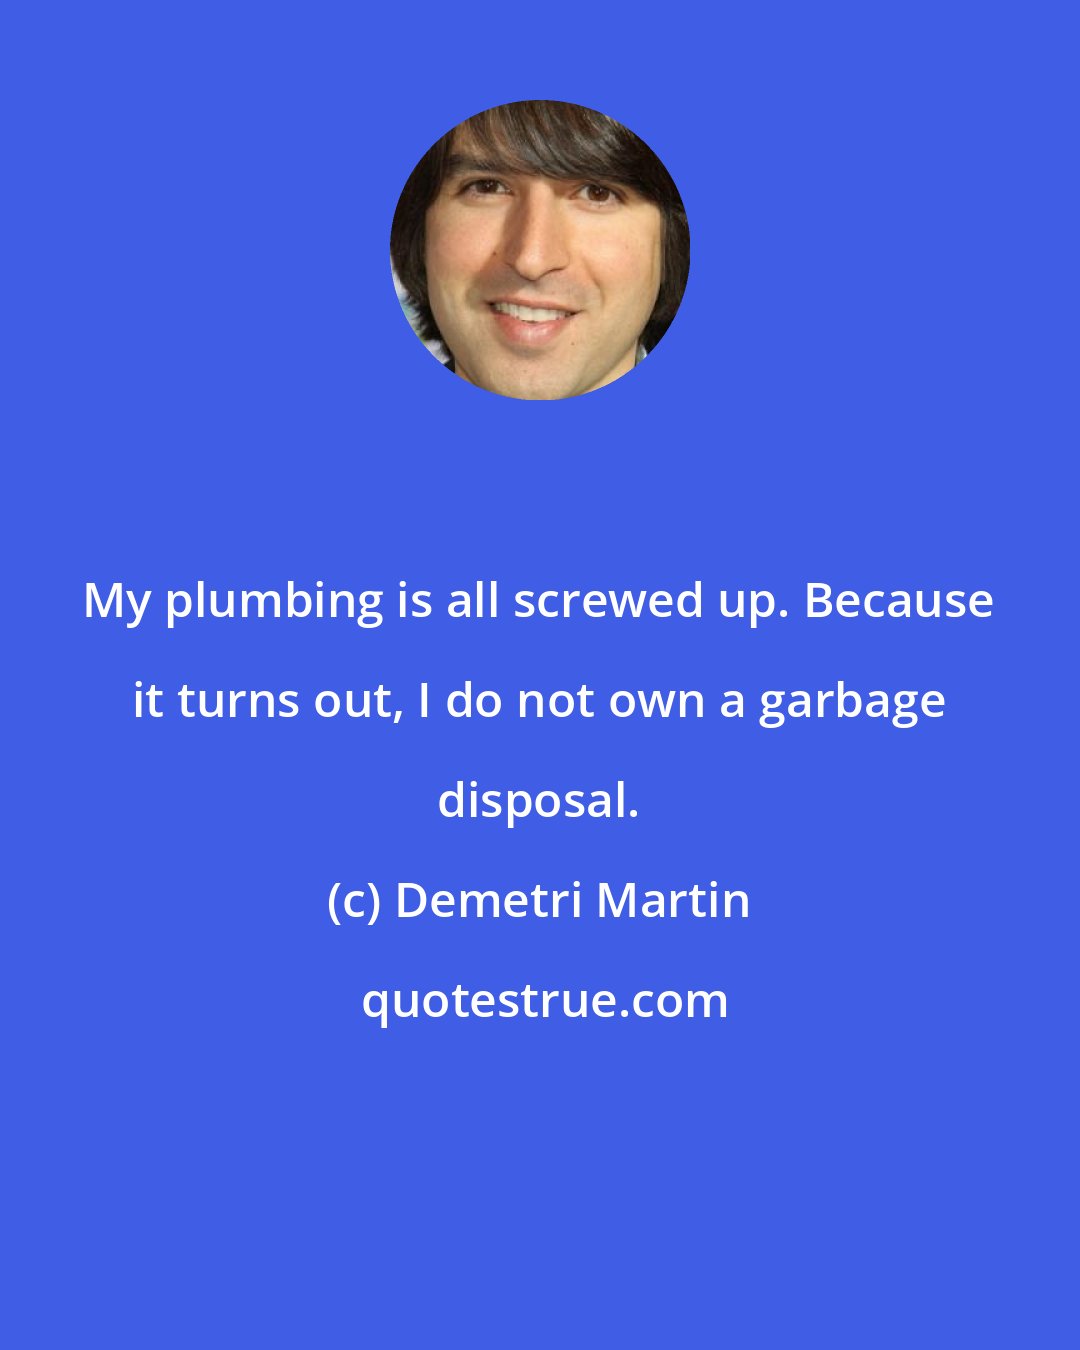 Demetri Martin: My plumbing is all screwed up. Because it turns out, I do not own a garbage disposal.